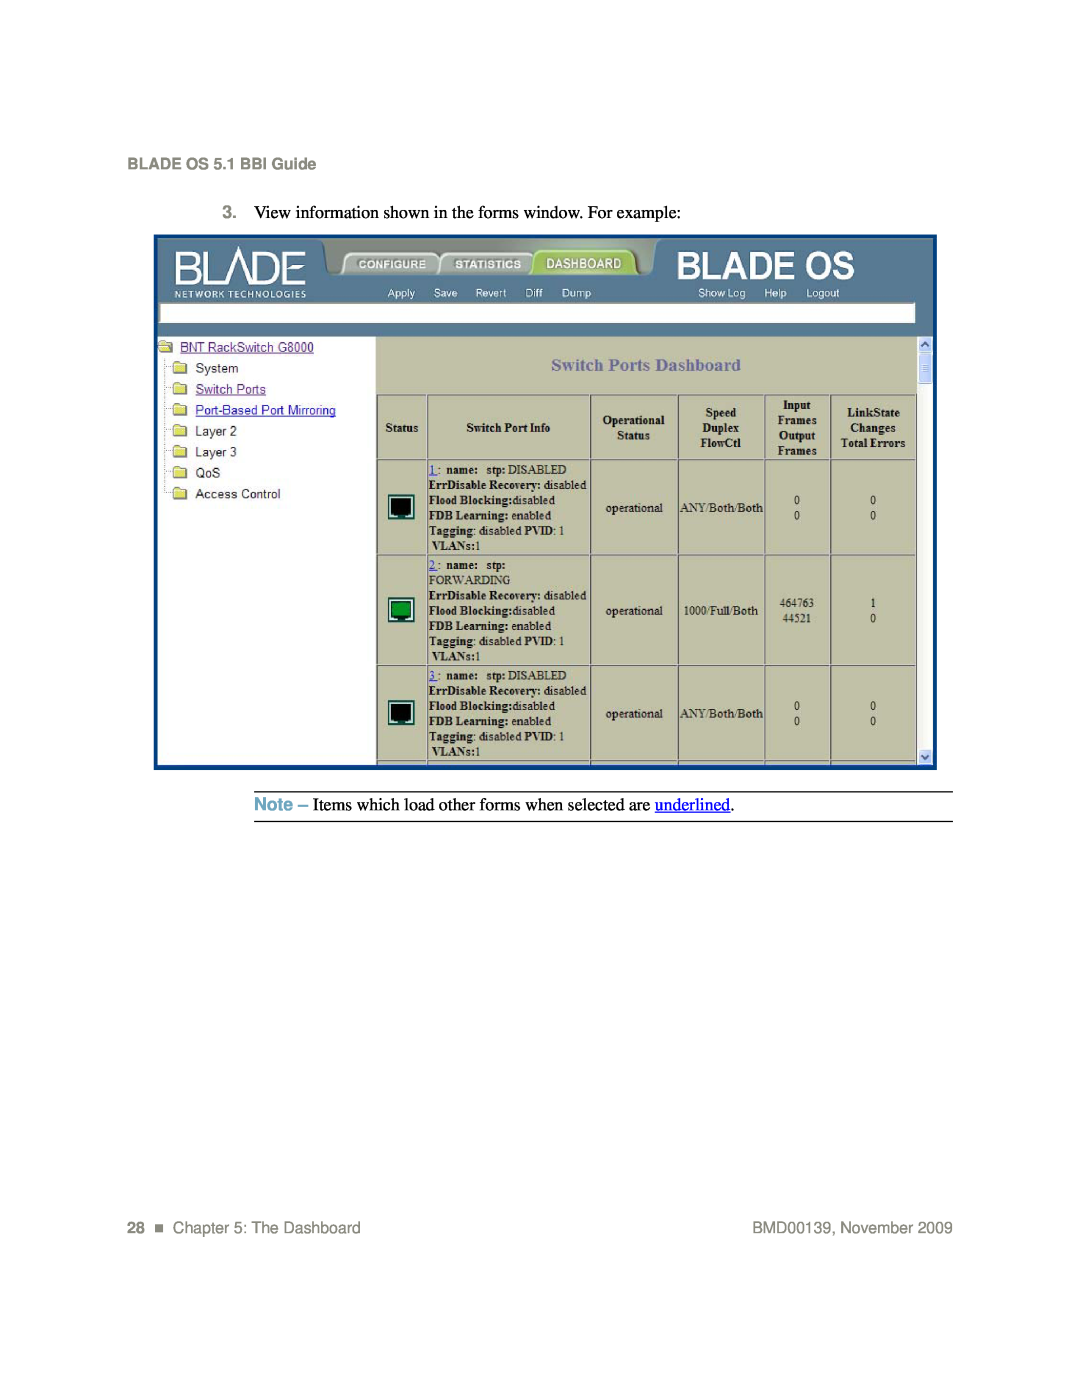 Blade ICE G8000 manual View information shown in the forms window. For example, BLADE OS 5.1 BBI Guide, 28 „ The Dashboard 